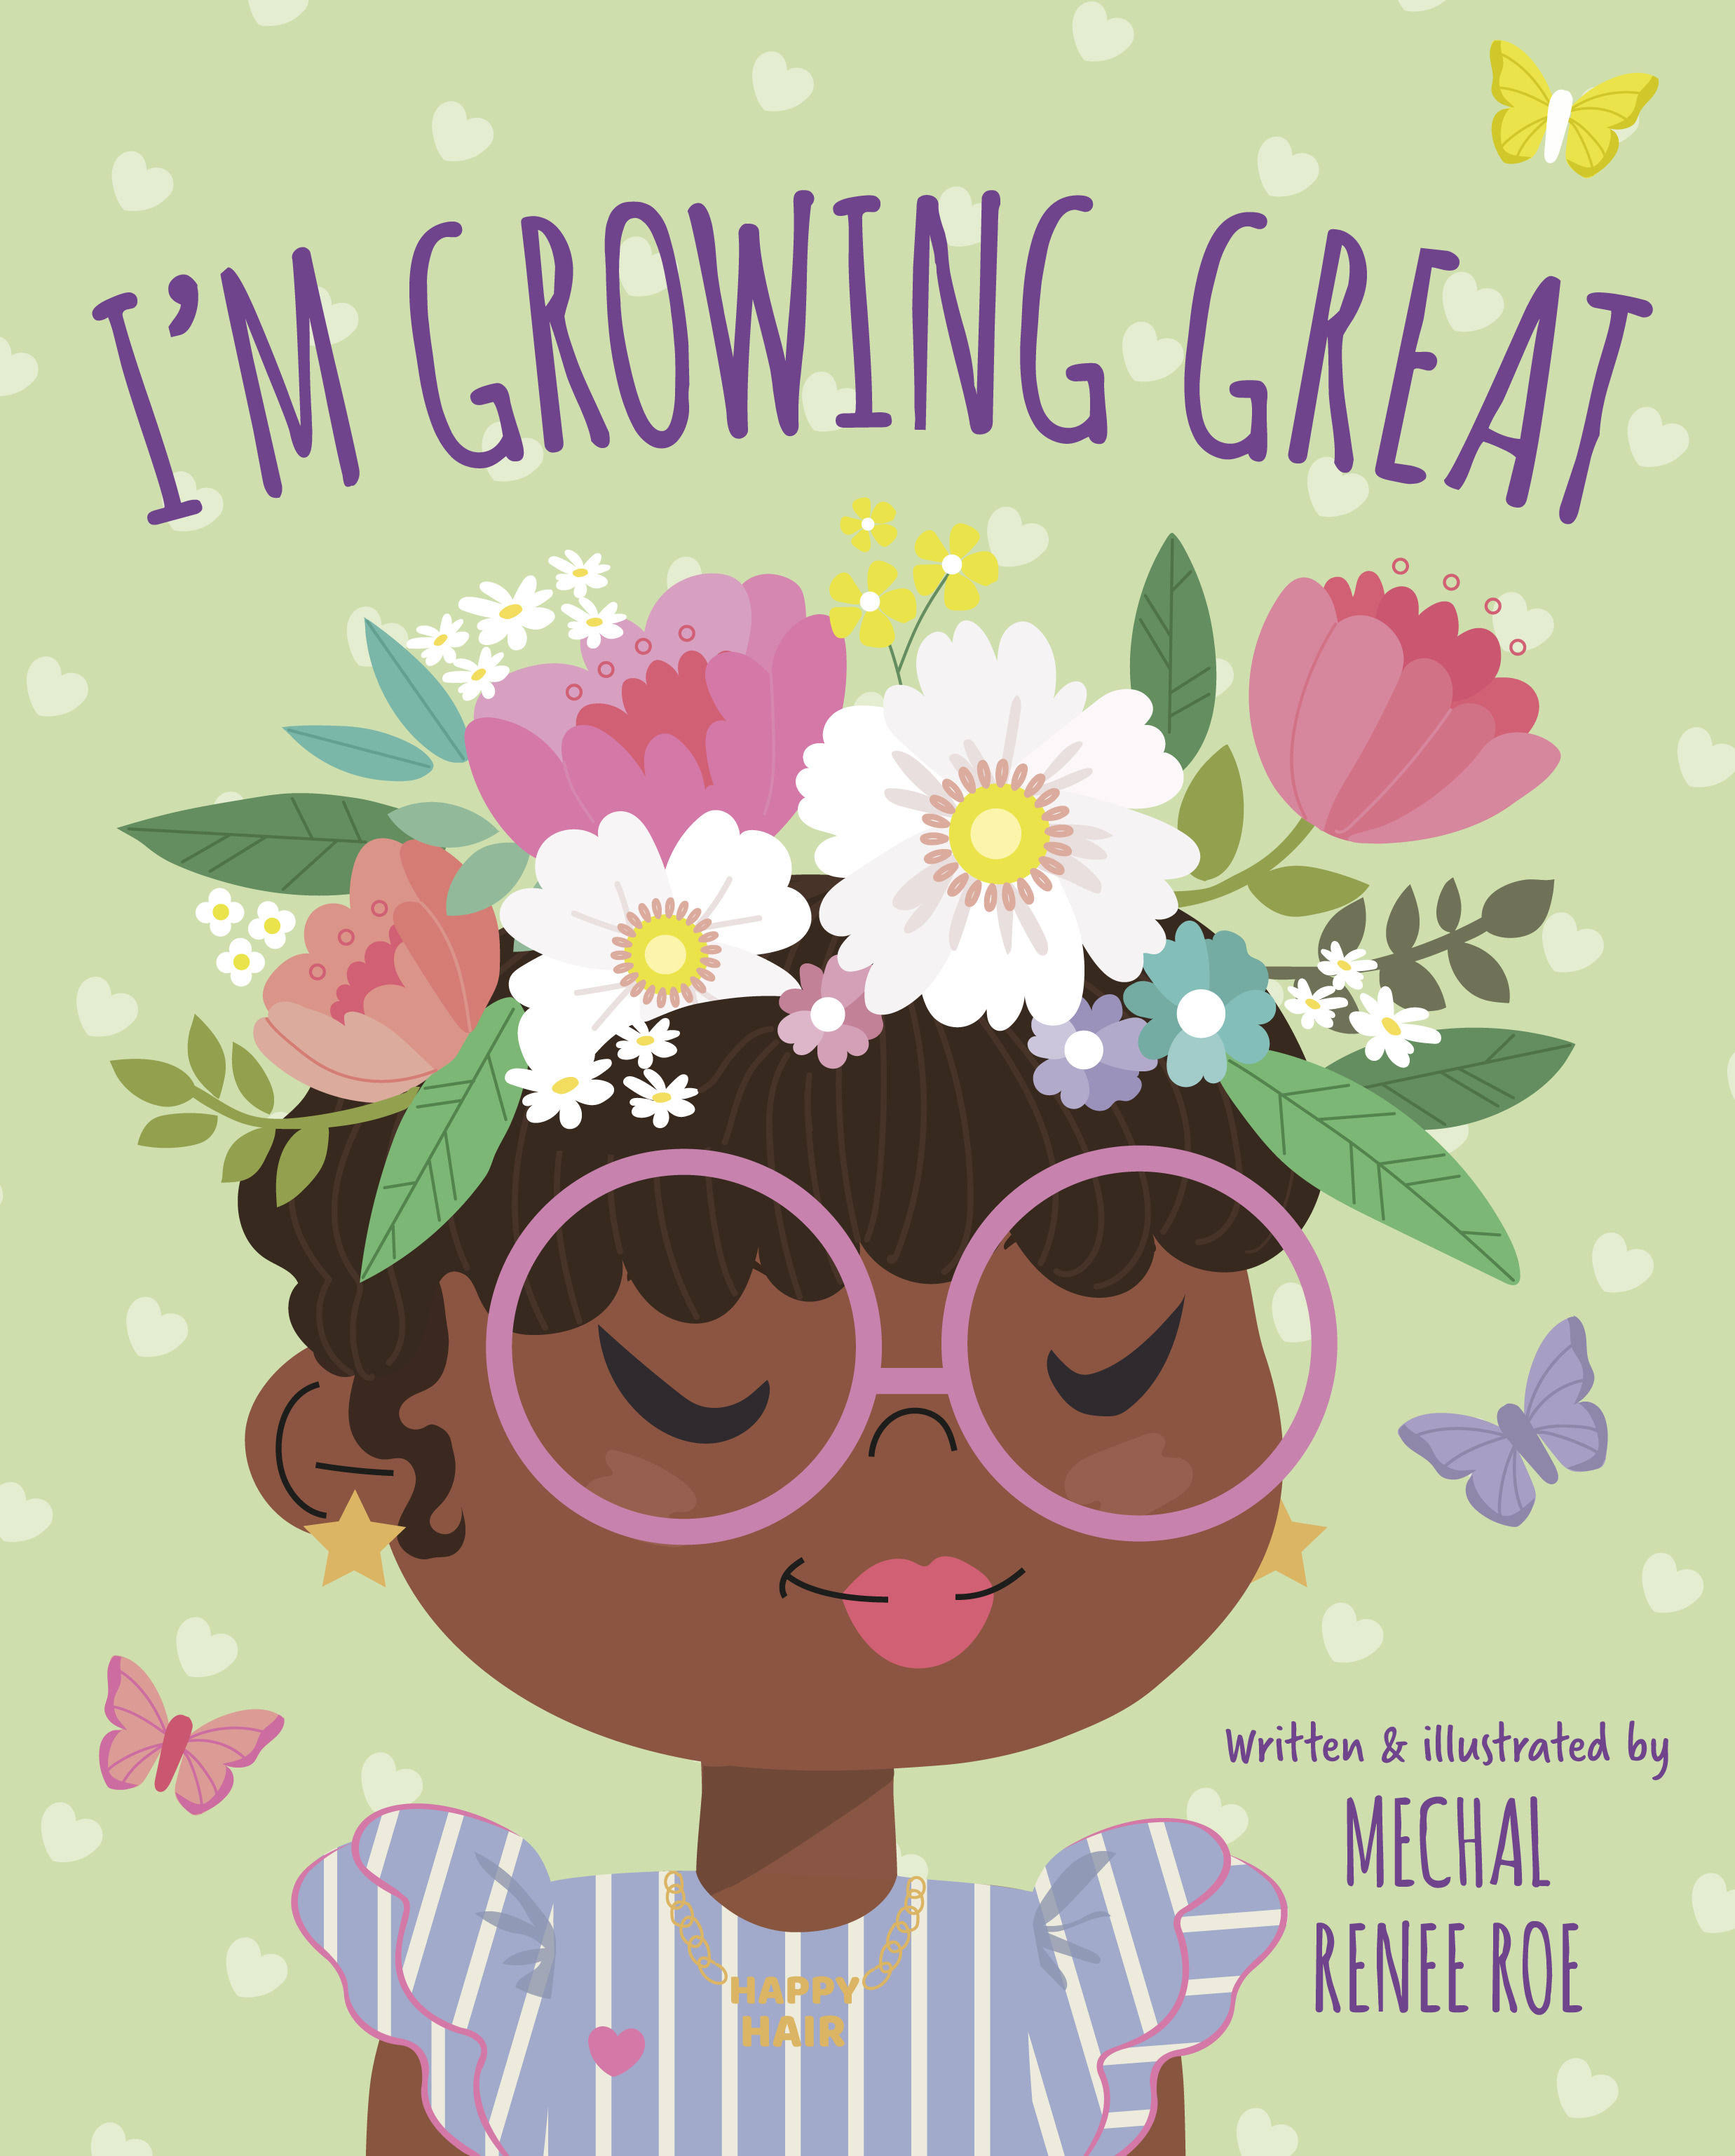 I'm Growing Great [Book]